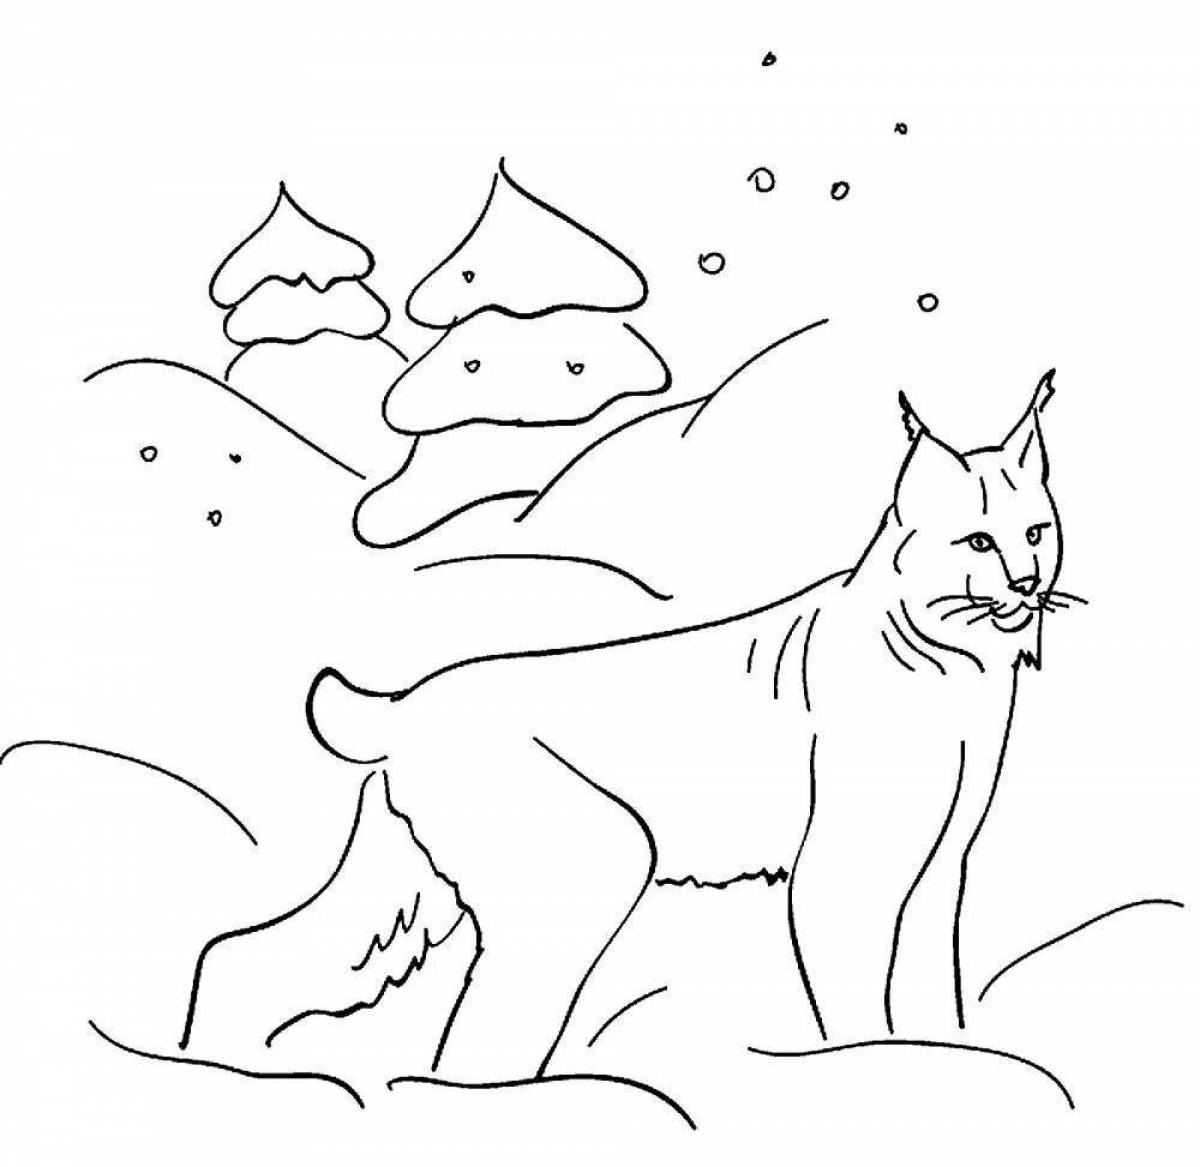 Glitter animal coloring pages for kids in winter